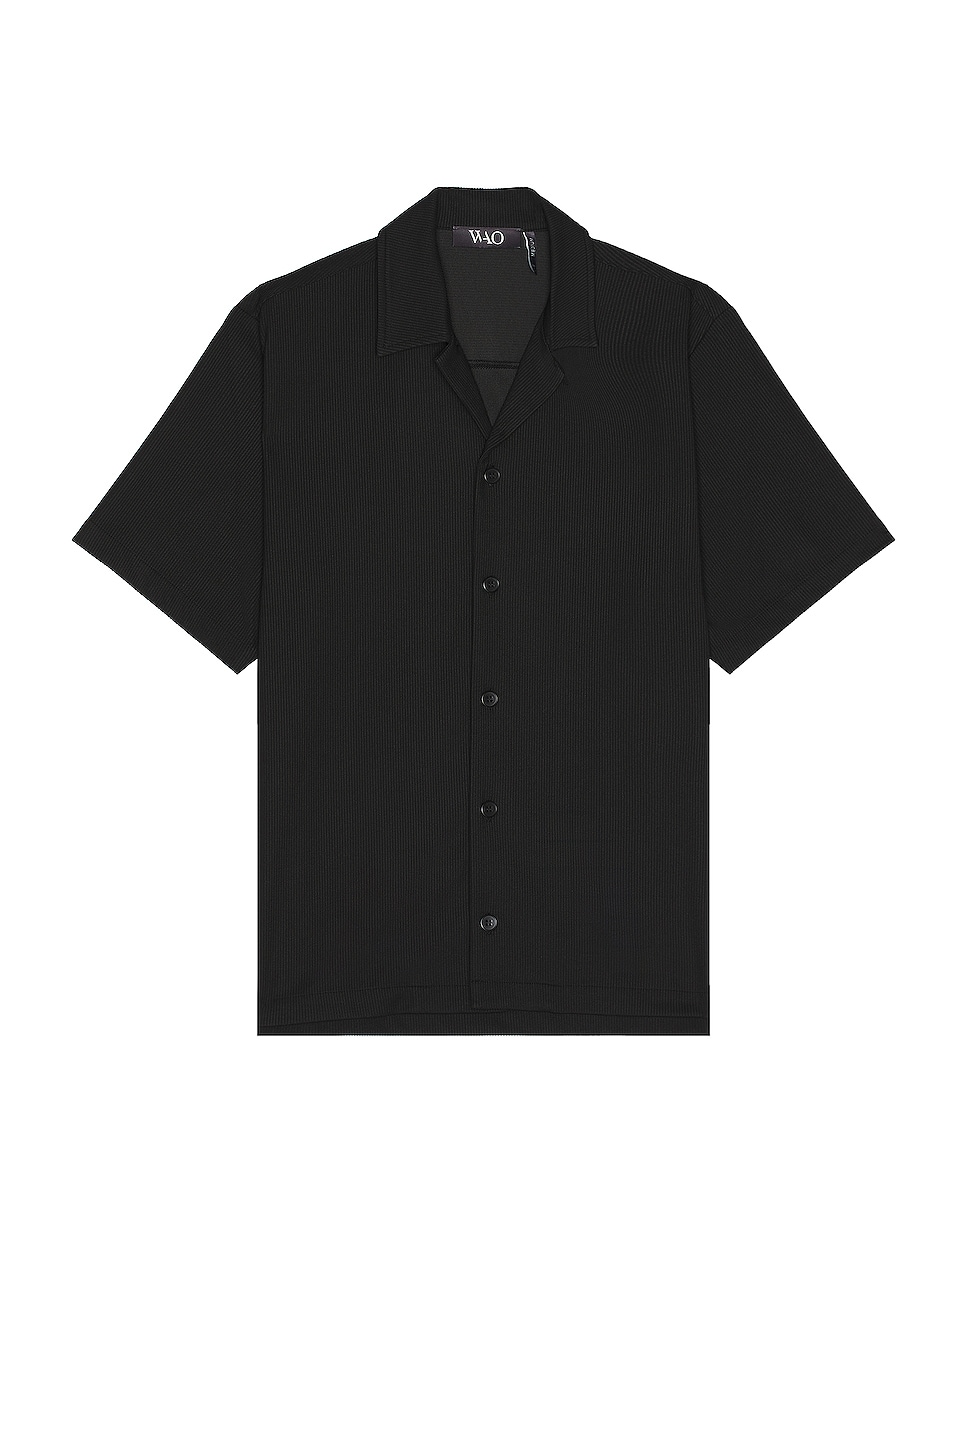 Image 1 of WAO Ribbed Knit Camp Shirt in black